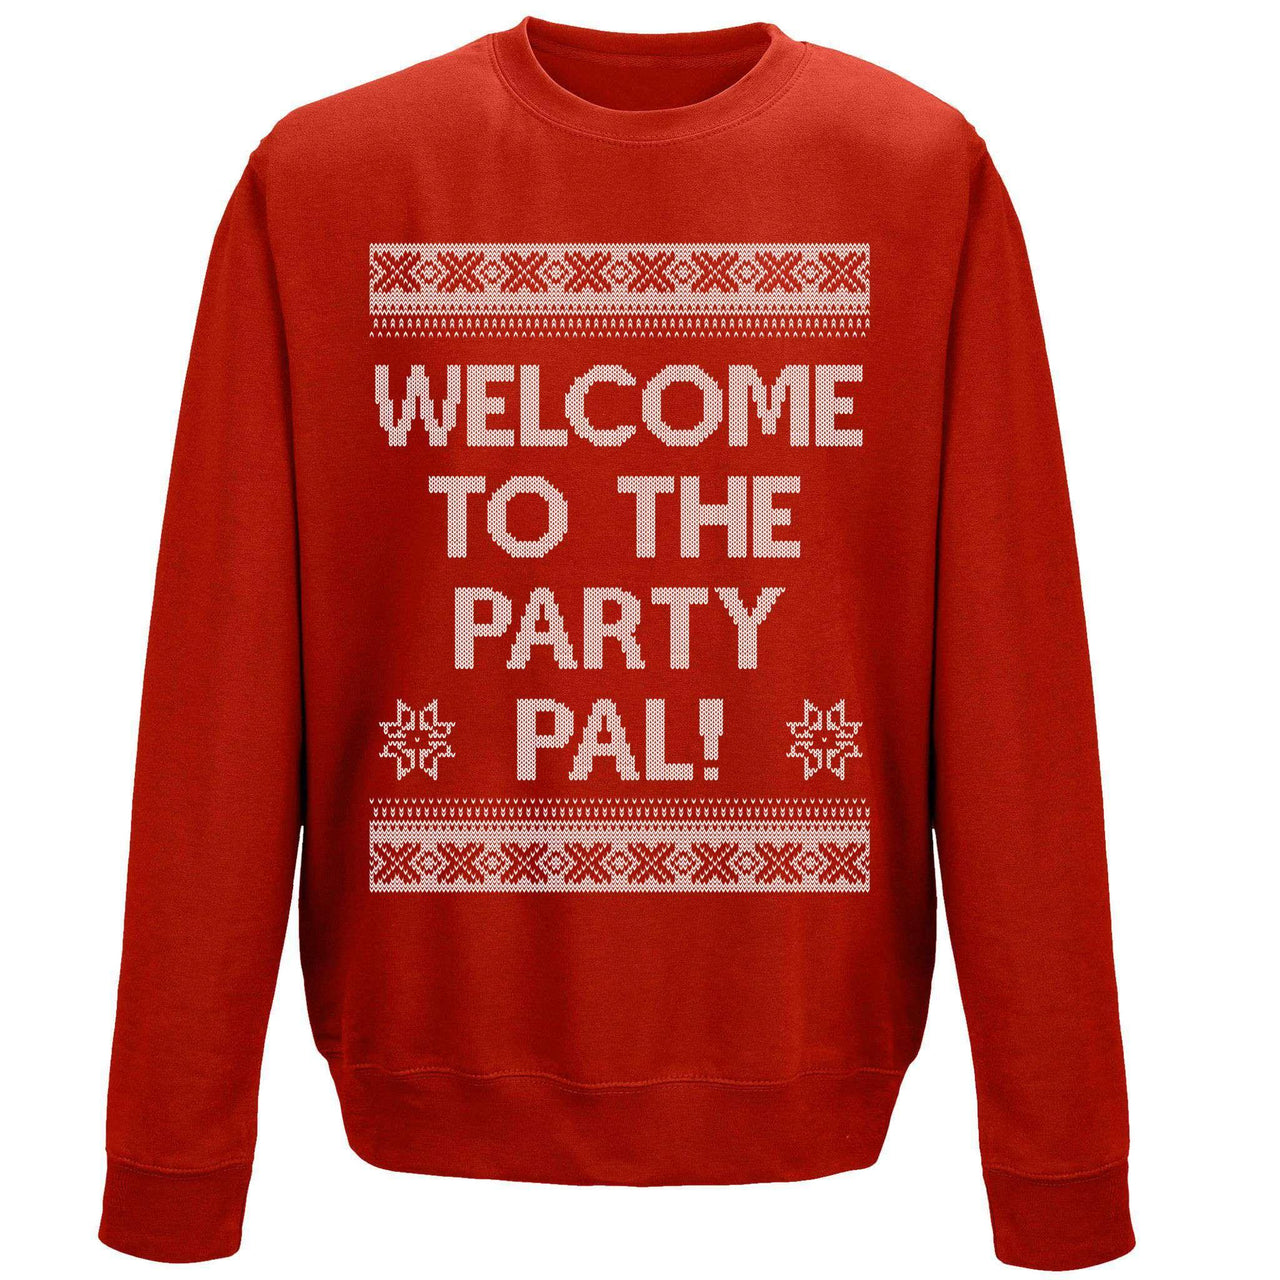 Welcome To The Party Pal Unisex Sweatshirt 8Ball